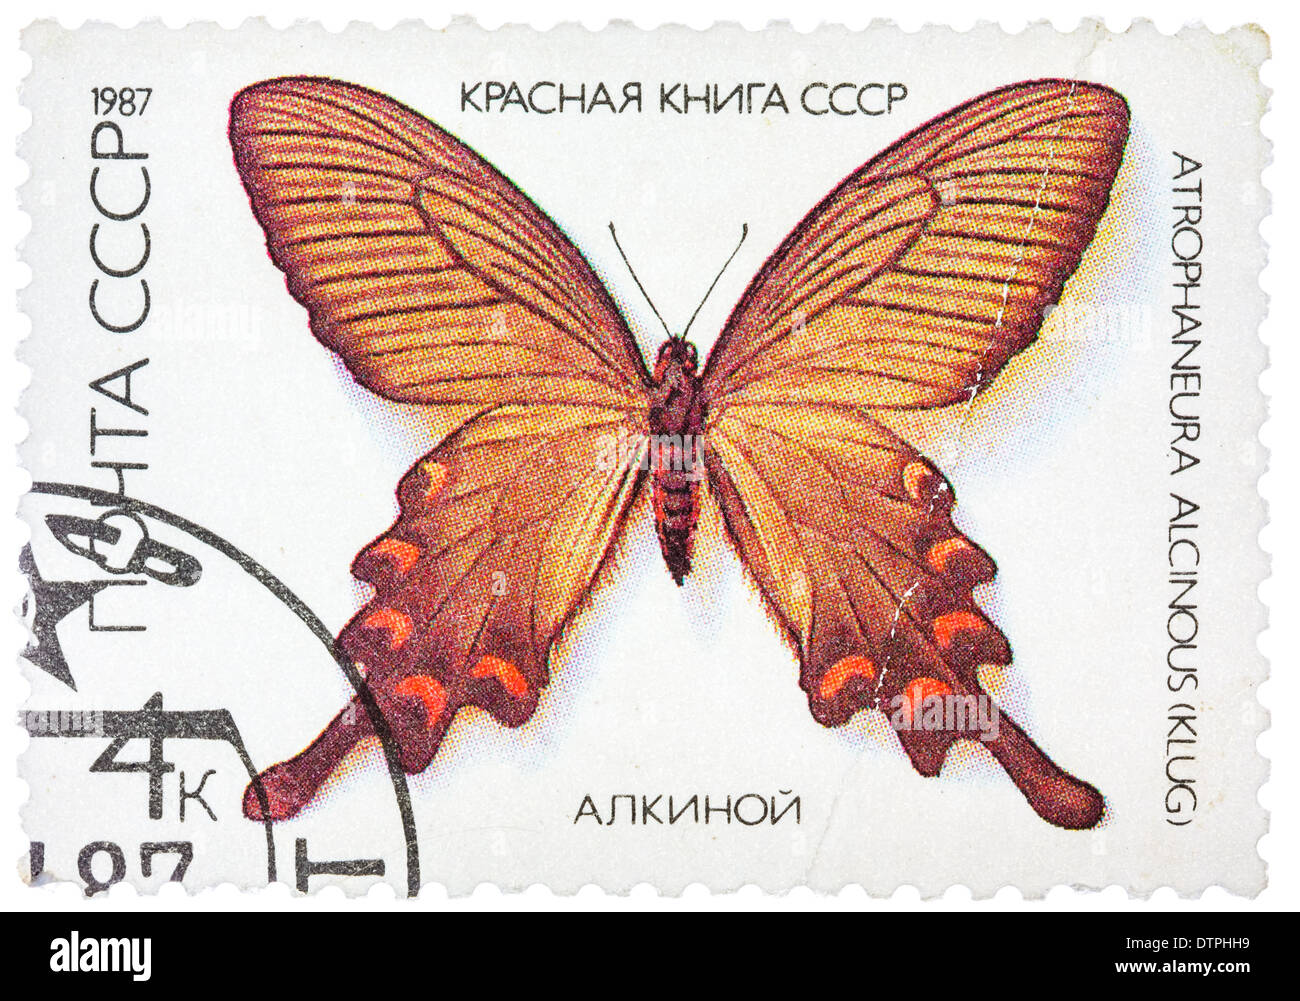 USSR - CIRCA 1986: A stamp printed in the USSR shows butterfly Alcinous, series, circa 1986 Stock Photo